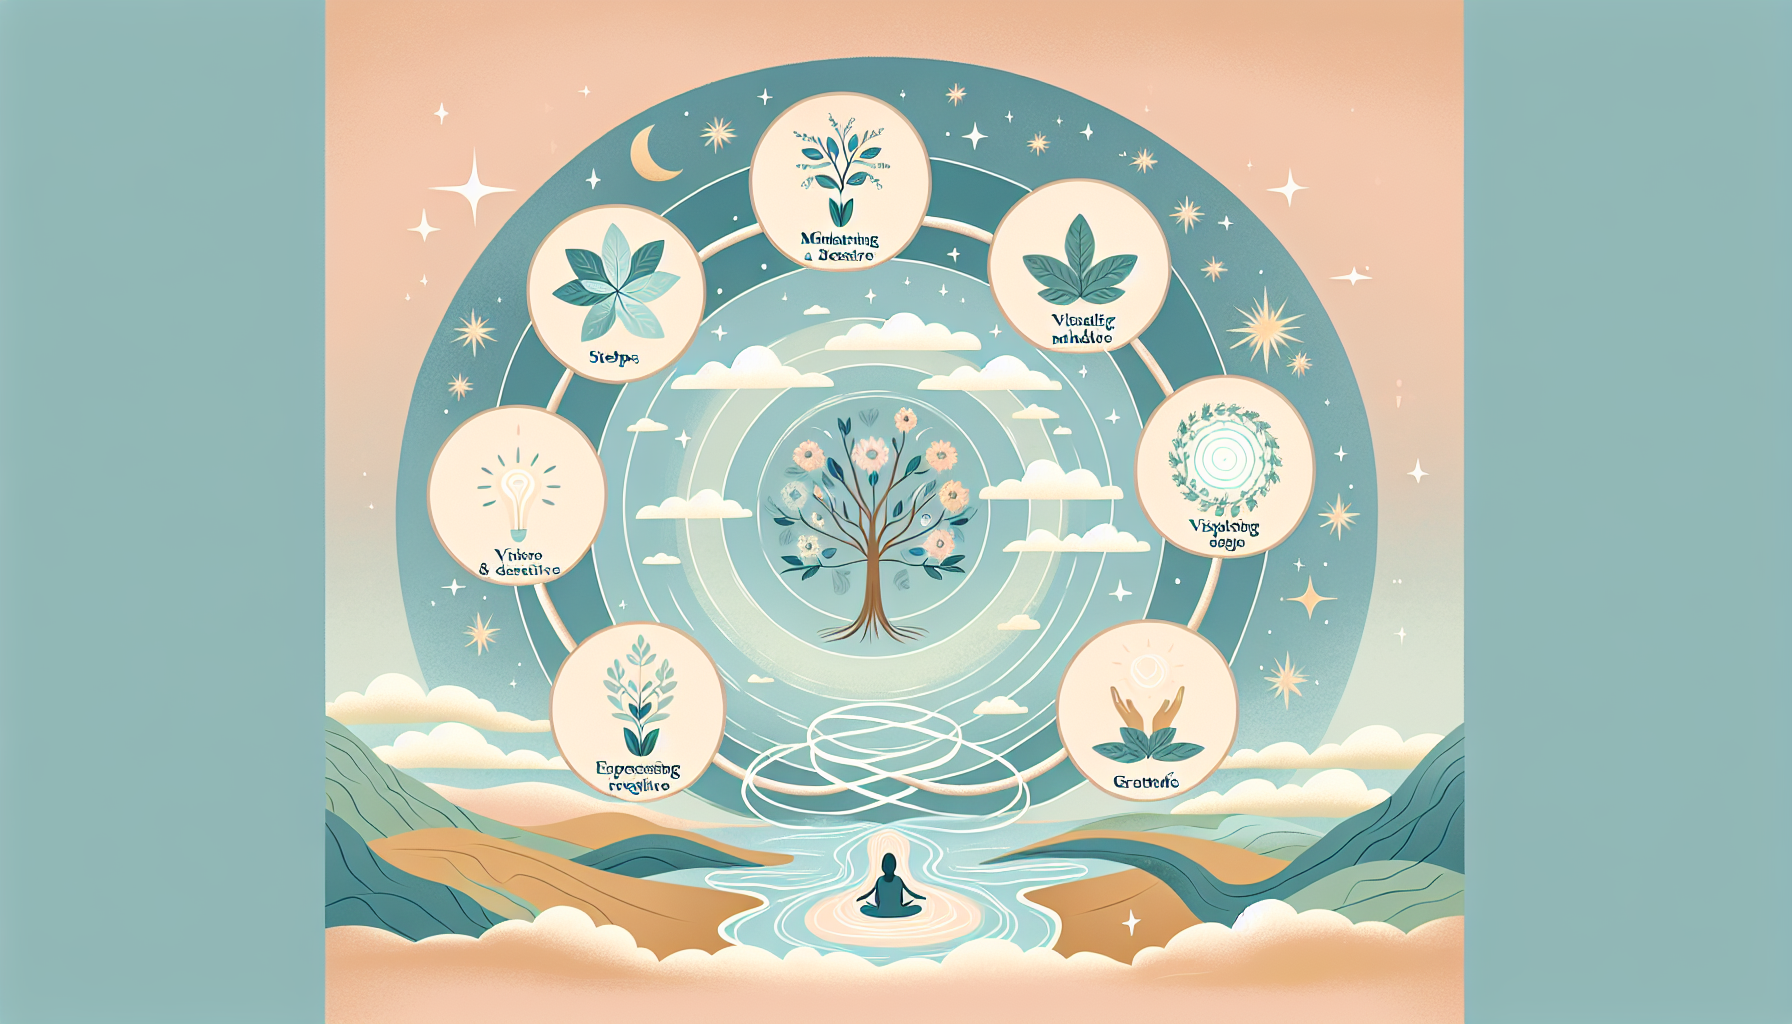 An illustration representing the process of manifesting desires by using the Law of Attraction. It should visually depict seven distinct steps, each symbolizing a particular stage such as maintaining a positive mindset, visualizing desires, expressing gratitude, etc. The image should have a peaceful and serene quality to it, possibly with soft colors and flowing lines to represent the flow of energy. It could also incorporate natural elements like a growing plant or a flowing river as metaphors for personal growth and progress.